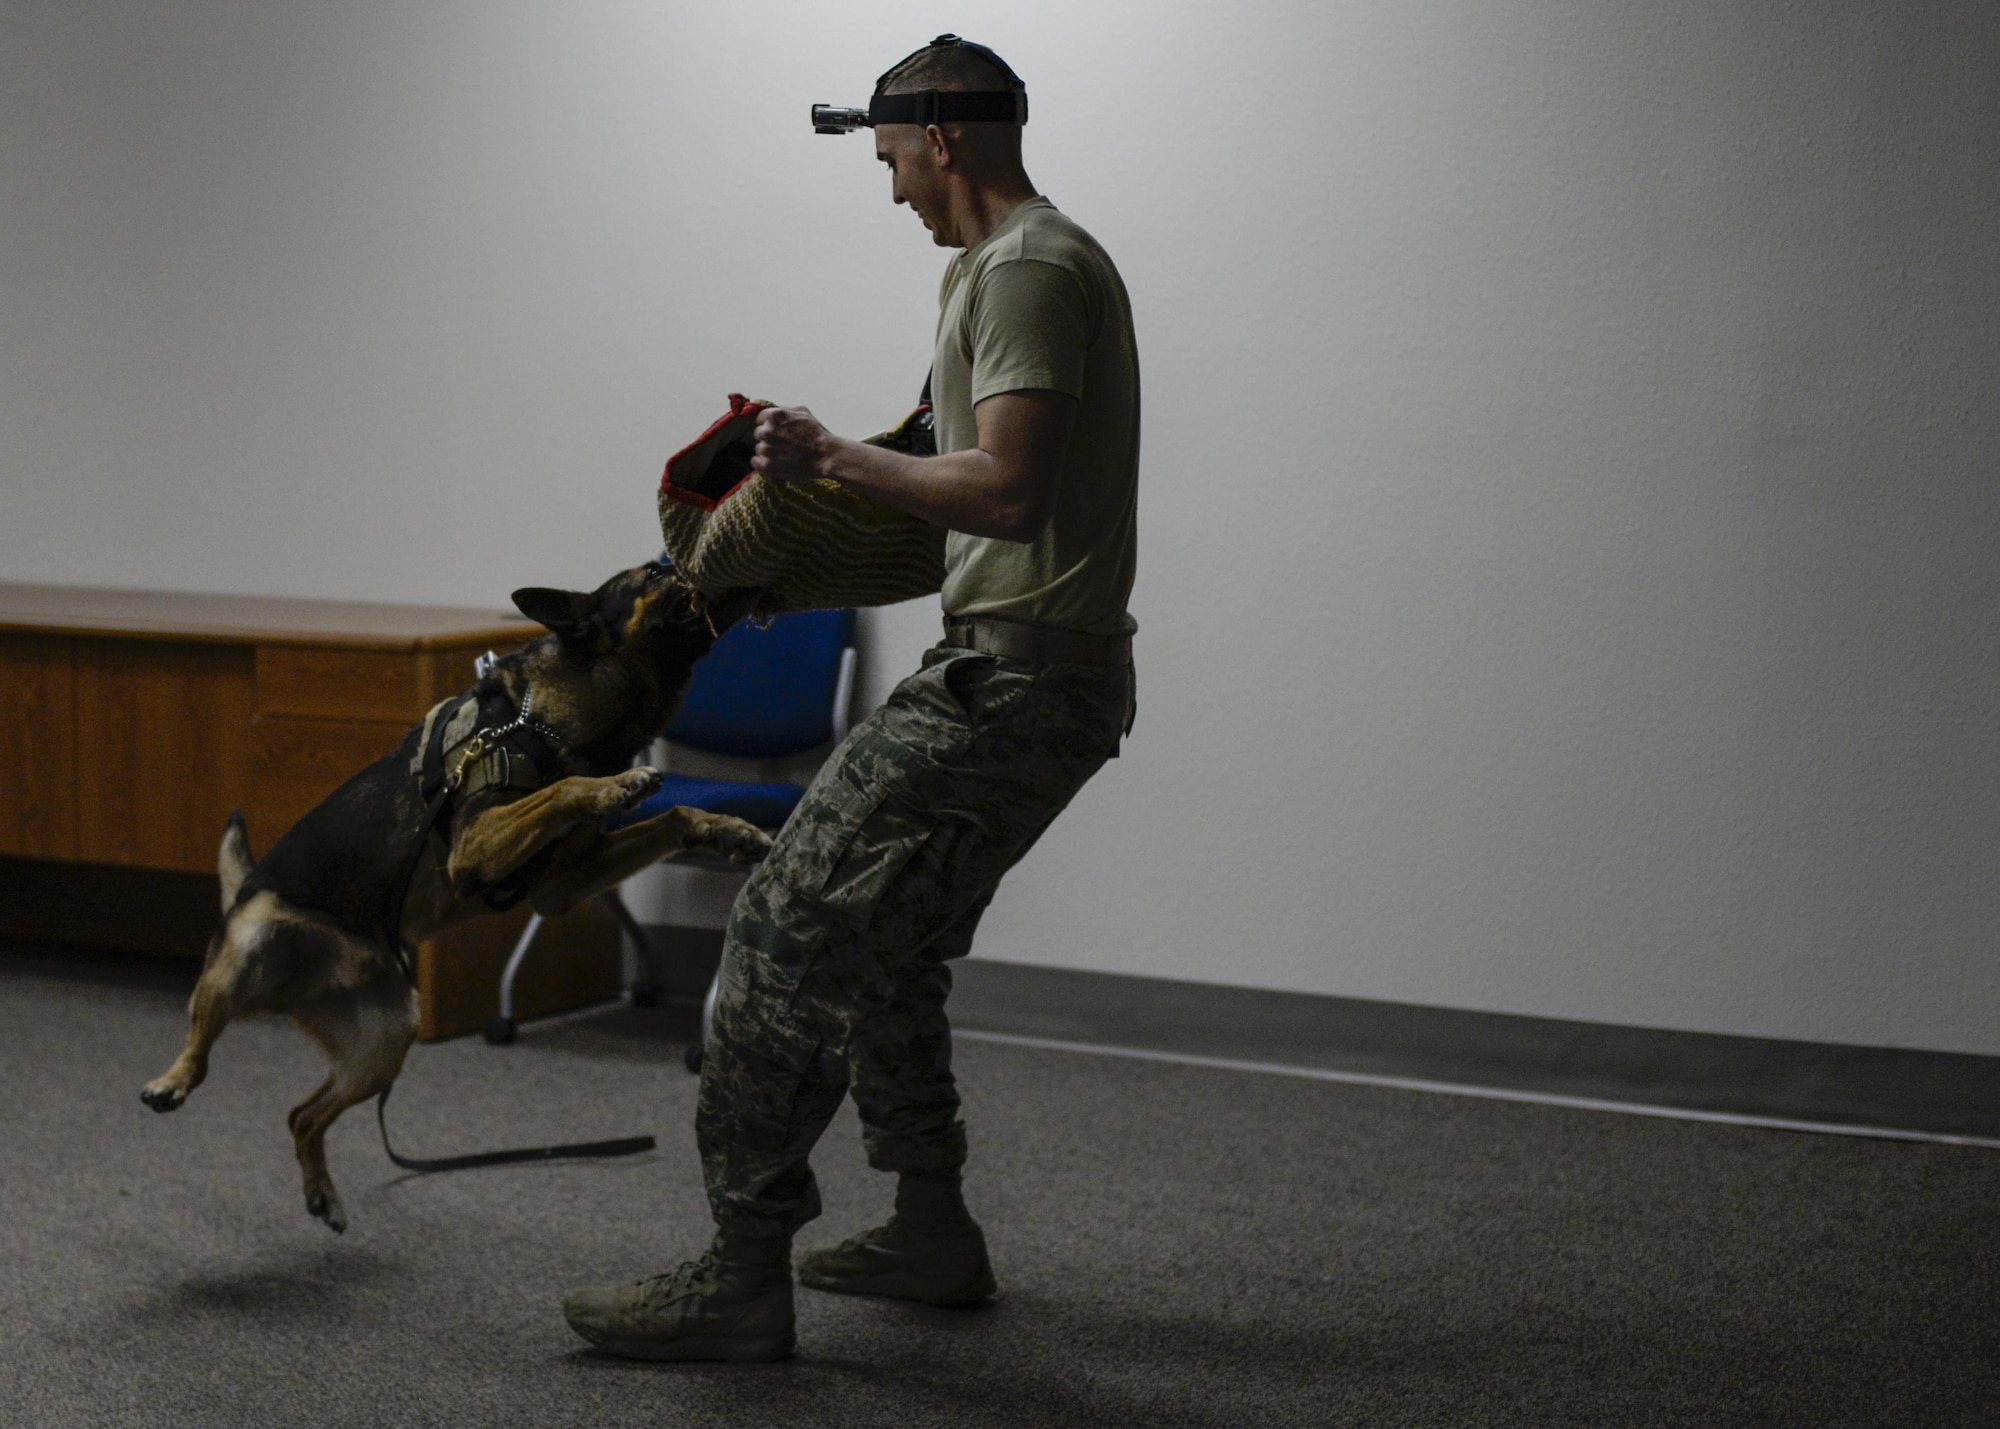 Staff Sgt. Jeremy, a military working dog handler with the 49th Security Forces Squadron, and his military working dog, Jacob, engage in a patrol simulation at Holloman Air Force Base, N.M. Dec. 7, 2016. Holloman’s MWDs are trained in basic obedience and aggression, and regularly engage in patrol simulations, where they practice explosive and narcotics detection. (U.S. Air Force photo by Airman 1st Class Alexis P. Docherty)